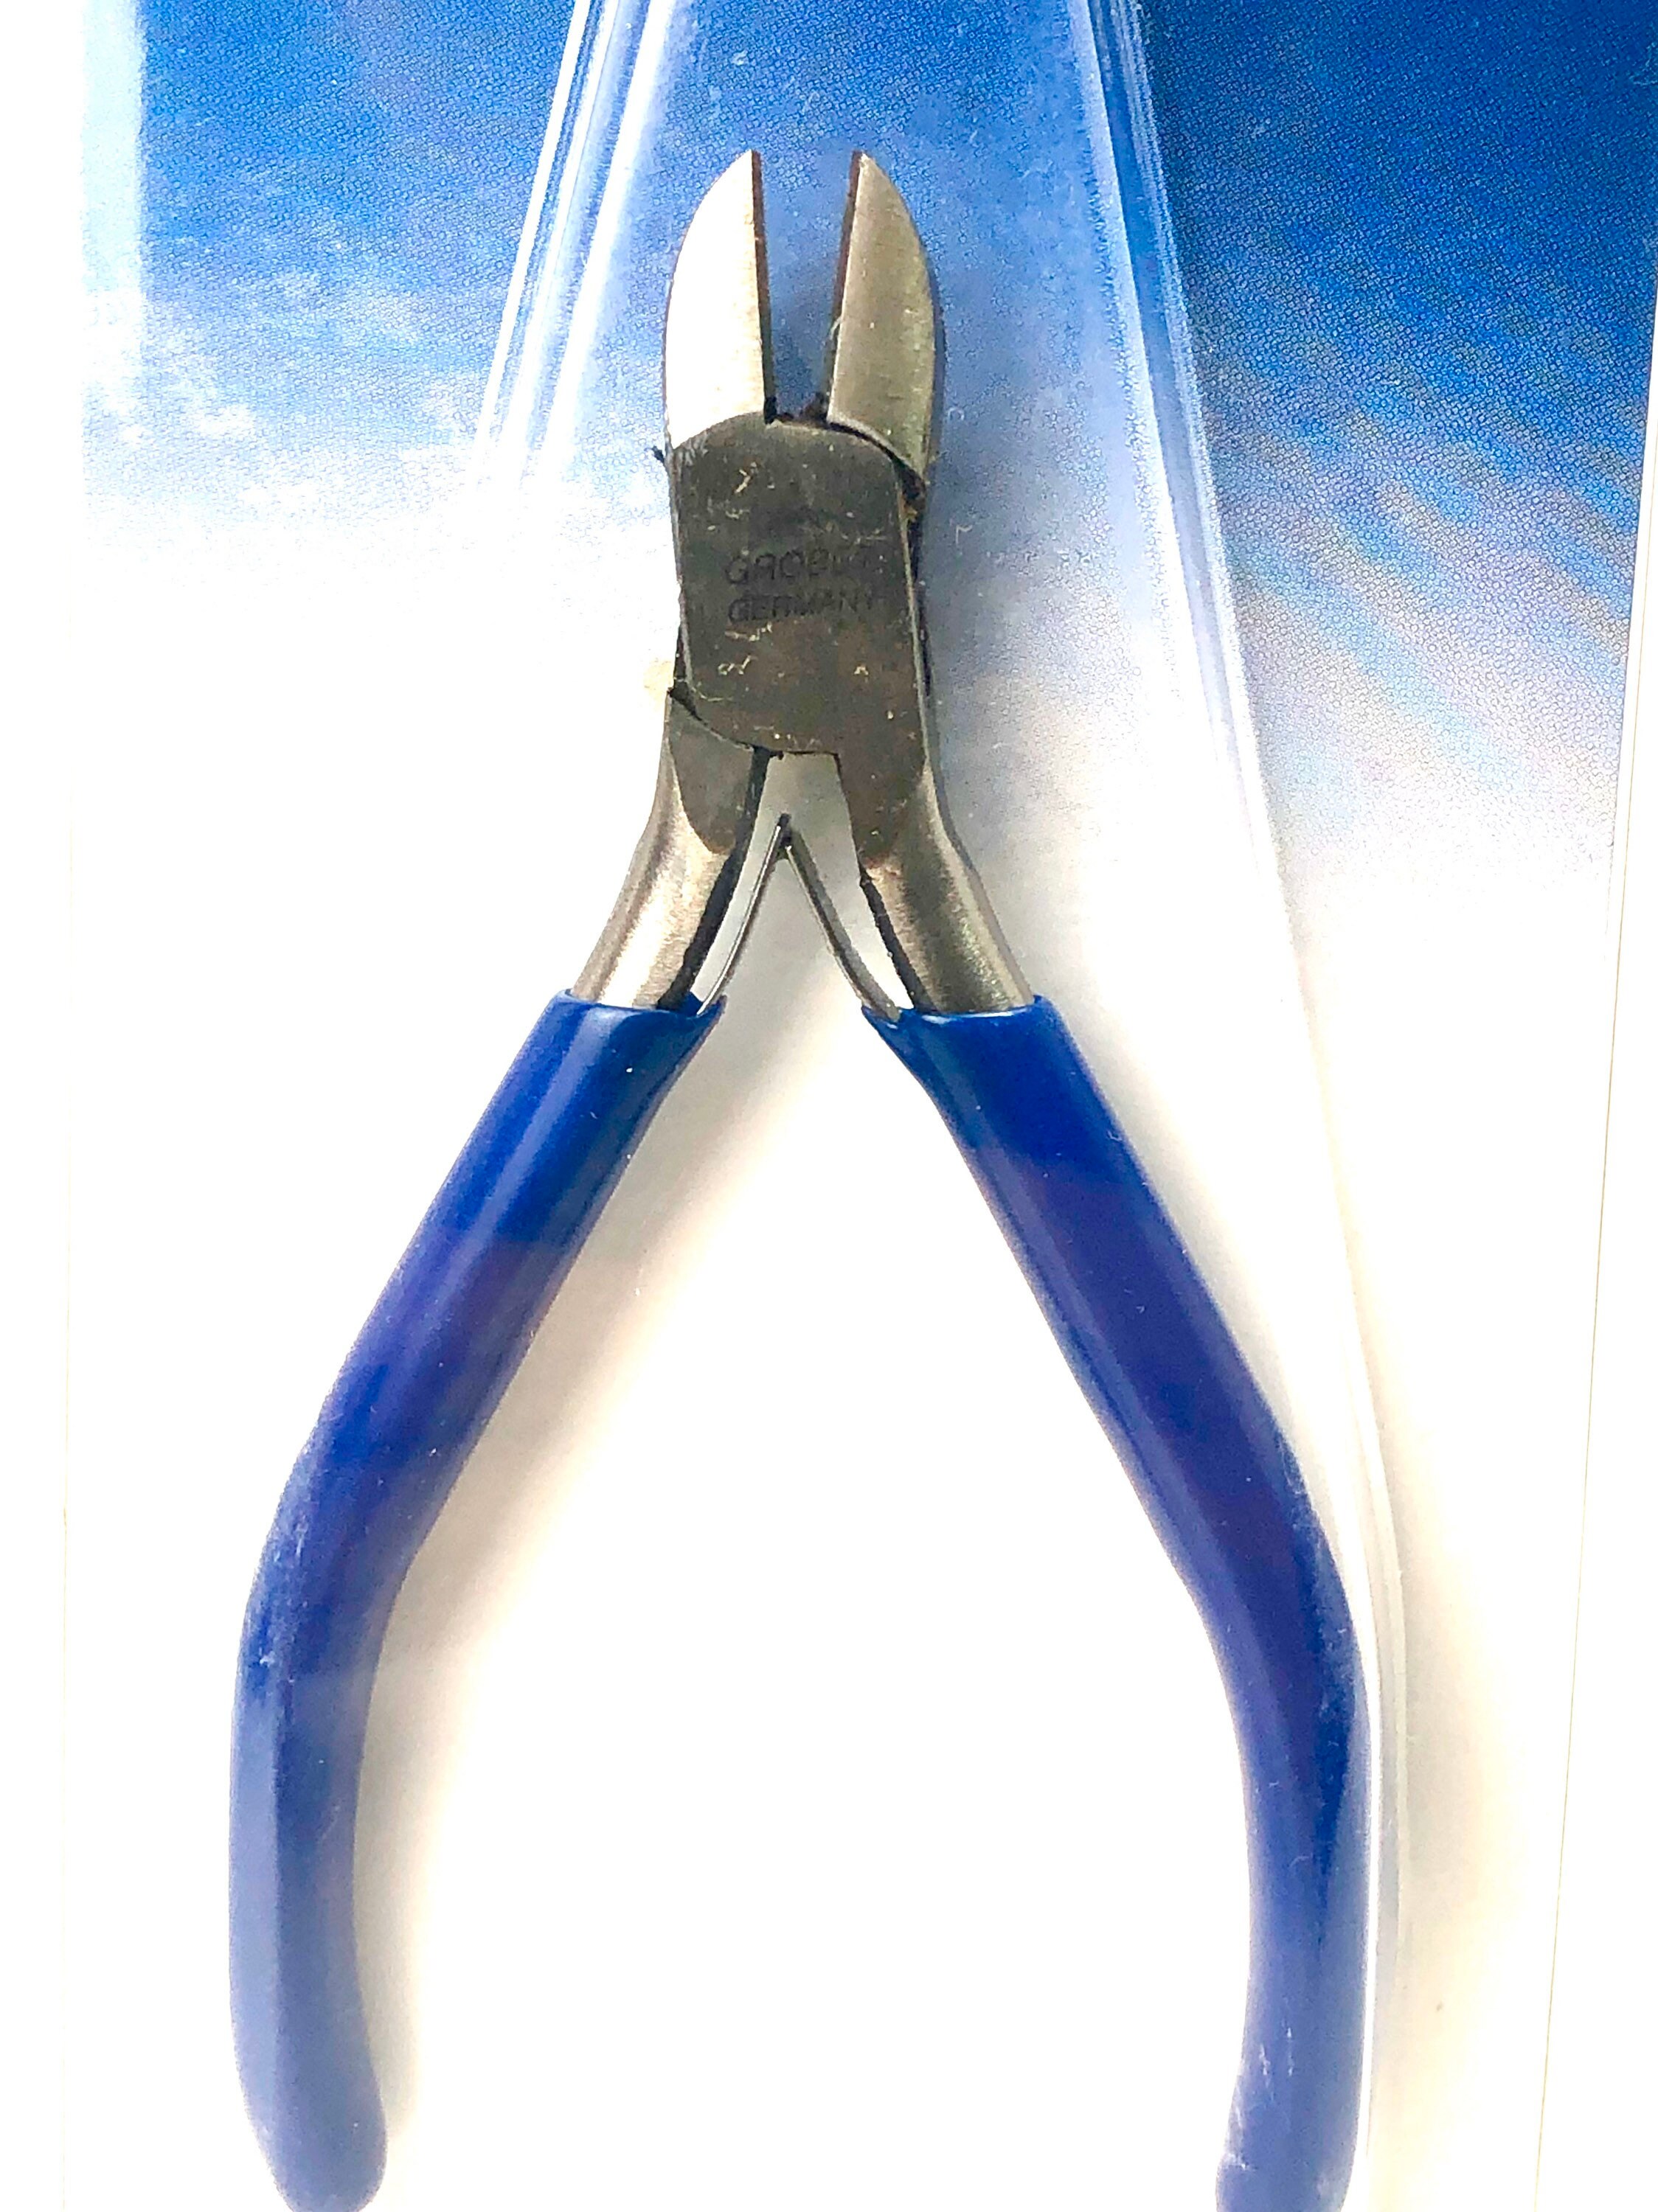 Micro Clean Cutter, Hakko Wire Cutters - Angled Cutter - Flush Cutter -  Jewelers Tool - Beading, Jewelry Making Cutter - up to 16 Gauge